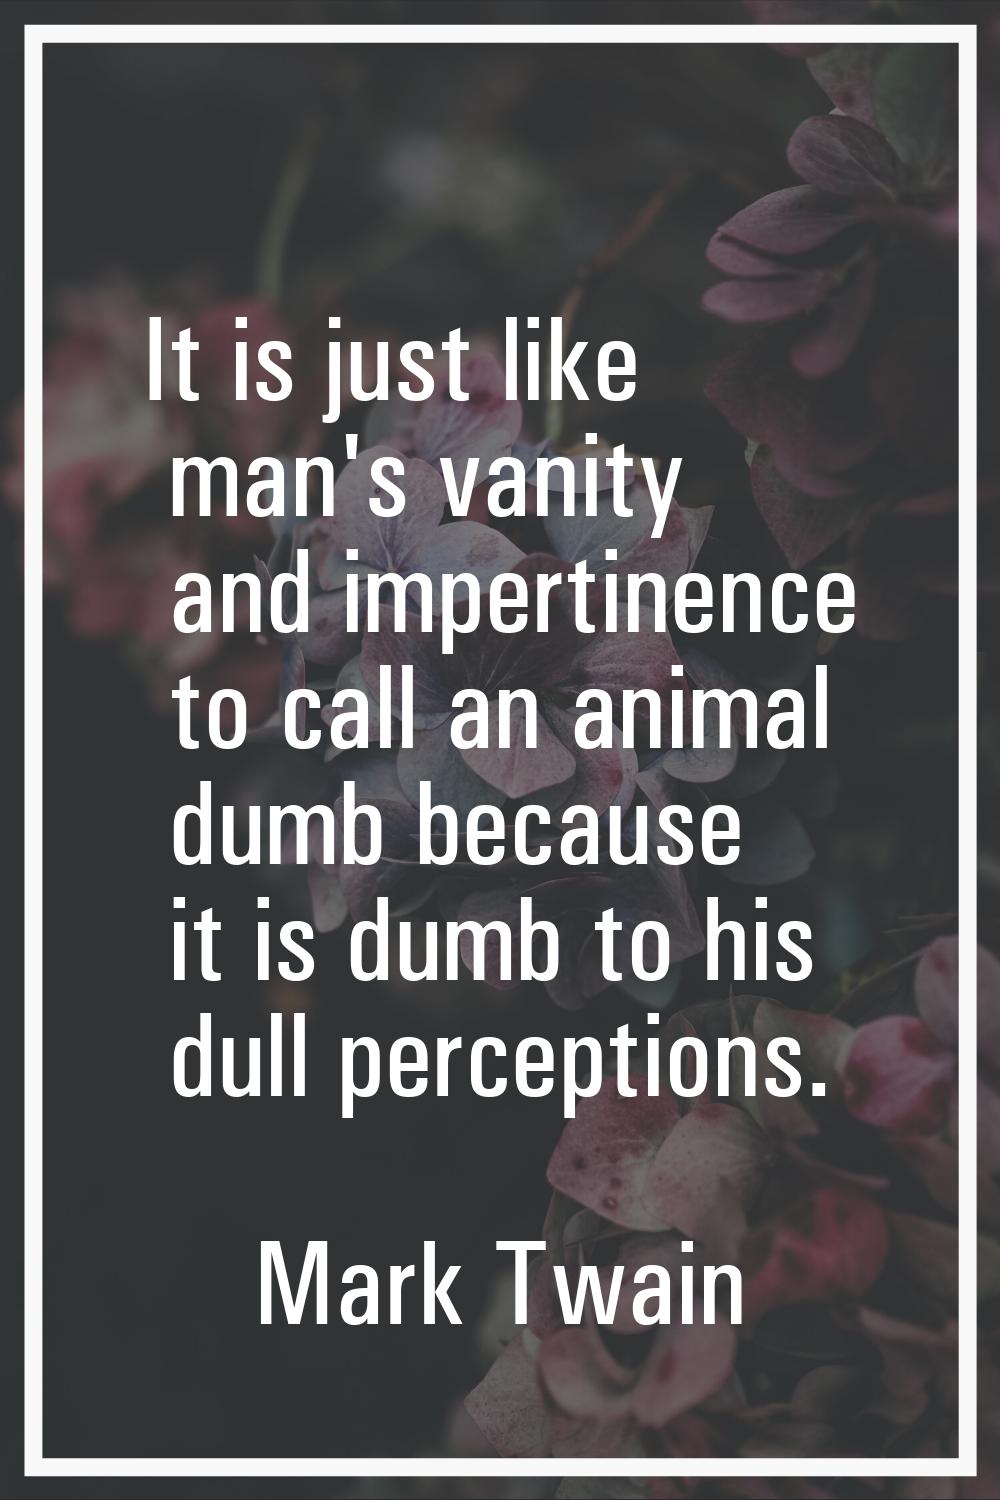 It is just like man's vanity and impertinence to call an animal dumb because it is dumb to his dull